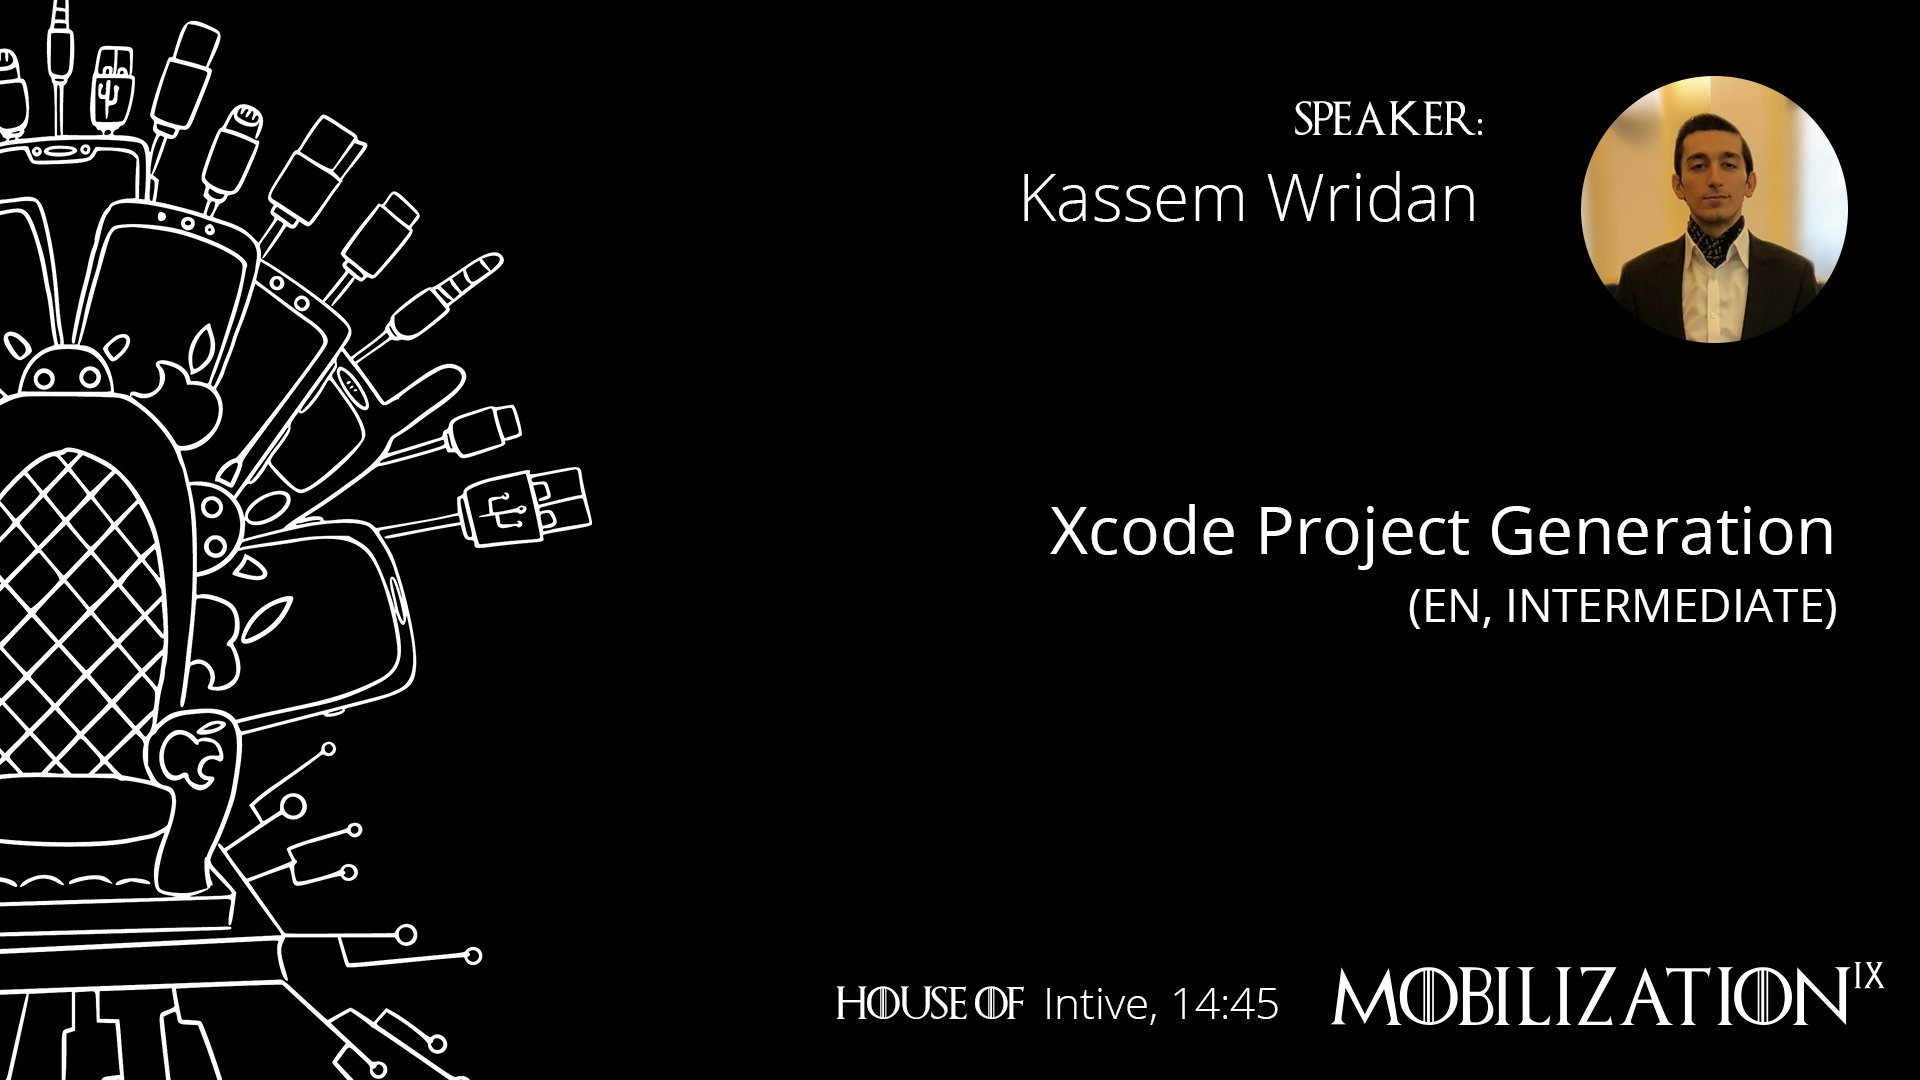 Xcode Project Generation talk at Mobilization 2019